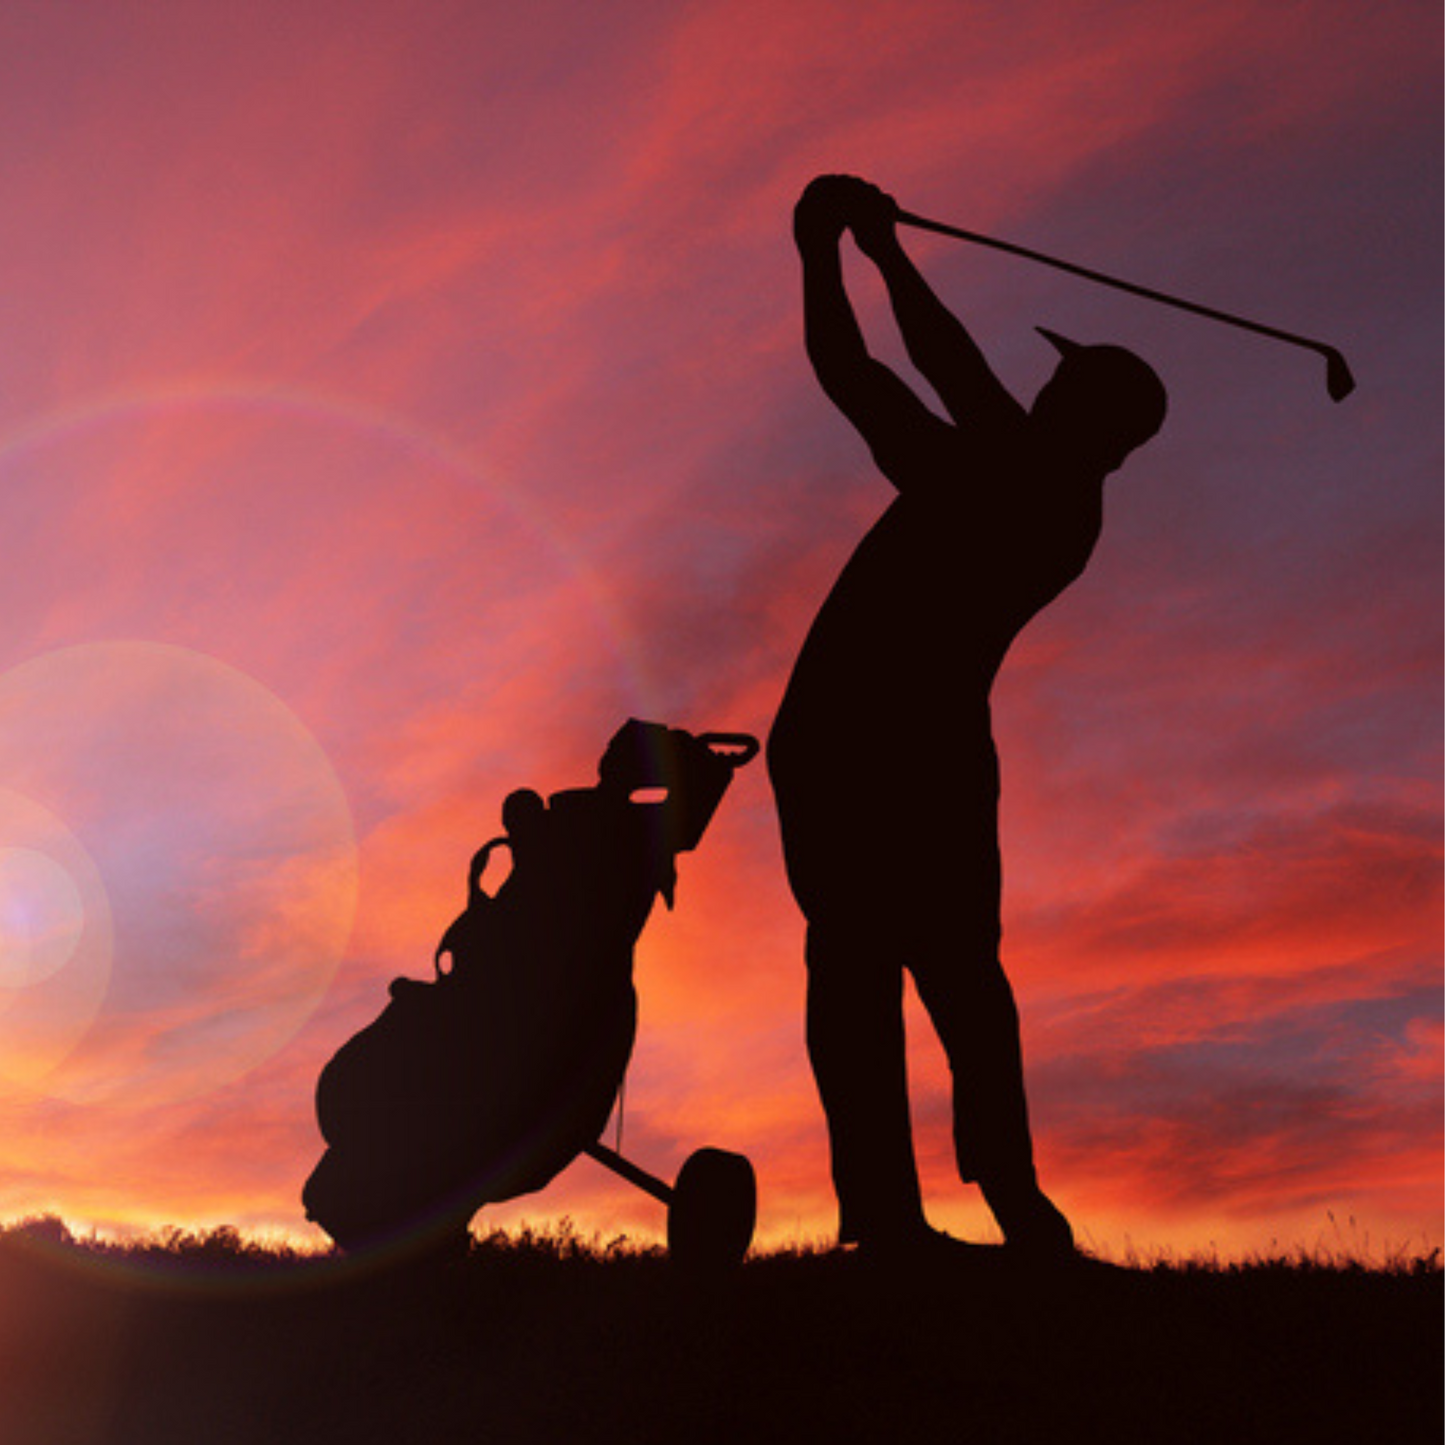 Golfer Silhouette During Sunset